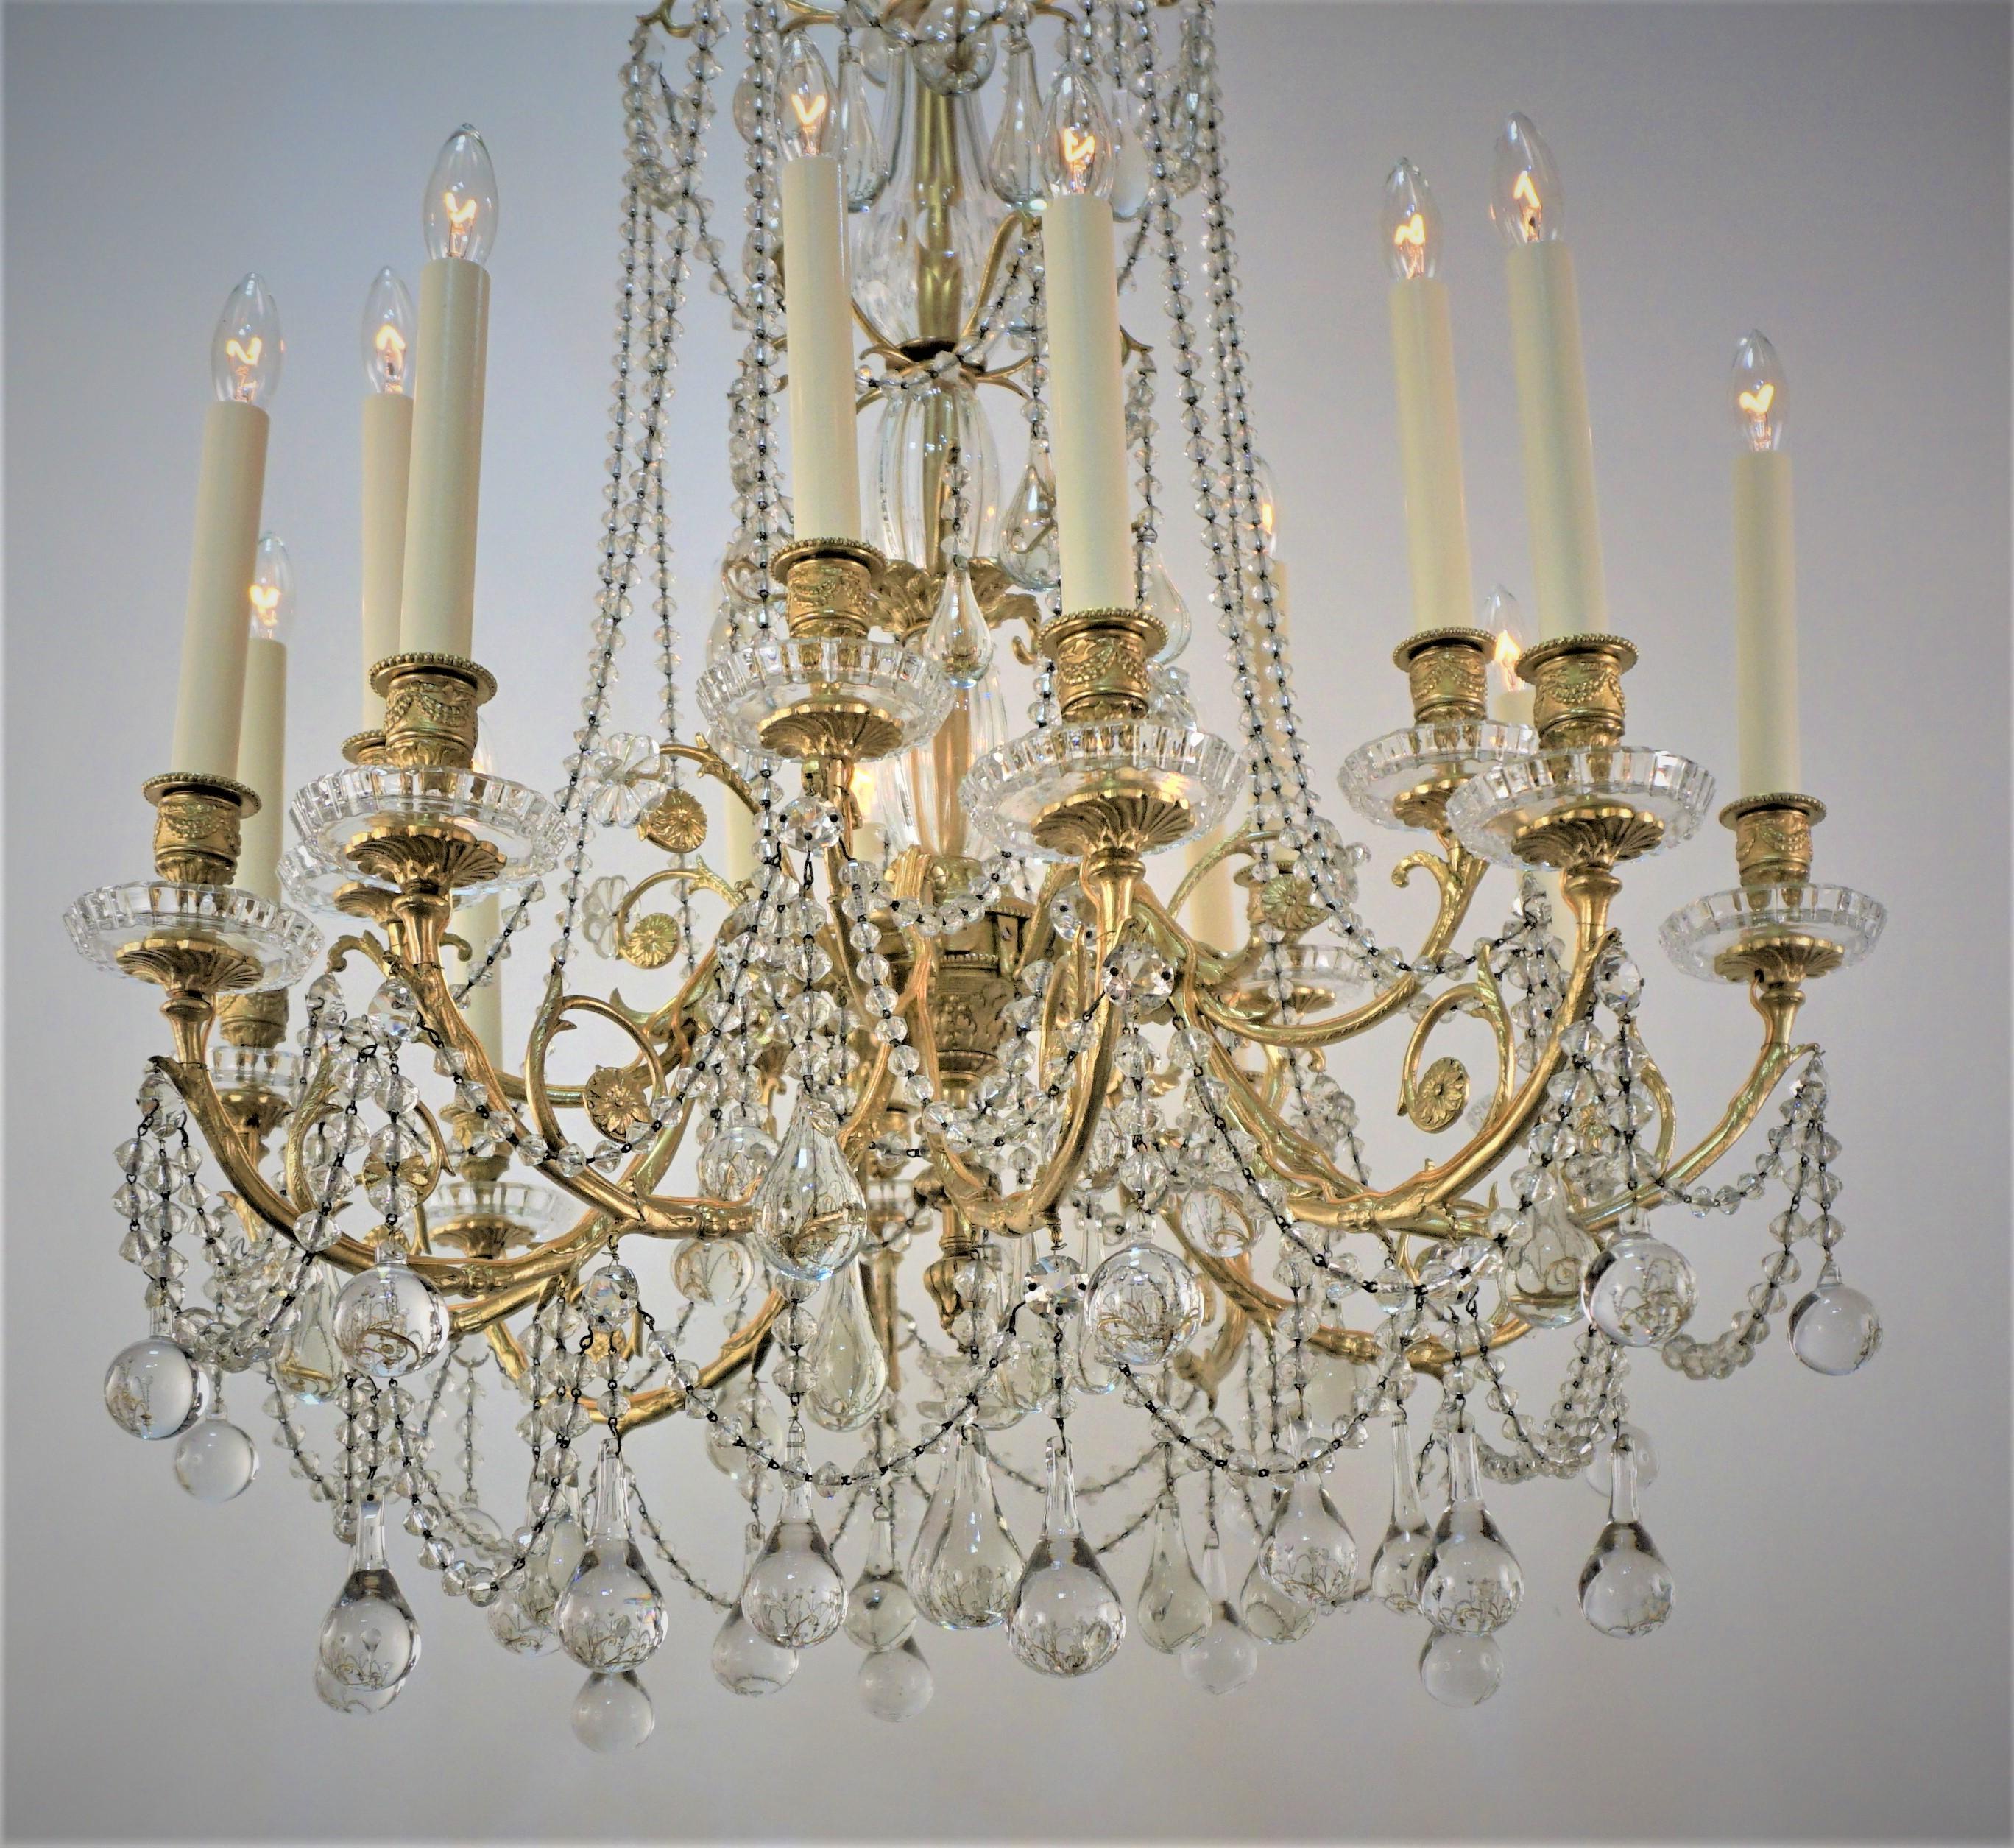 An Exquisite late 19th century bronze and crystal fifteen light chandelier marked Baccarat.
Professionally rewired and ready for installation.
Measurement: 29 width, 46